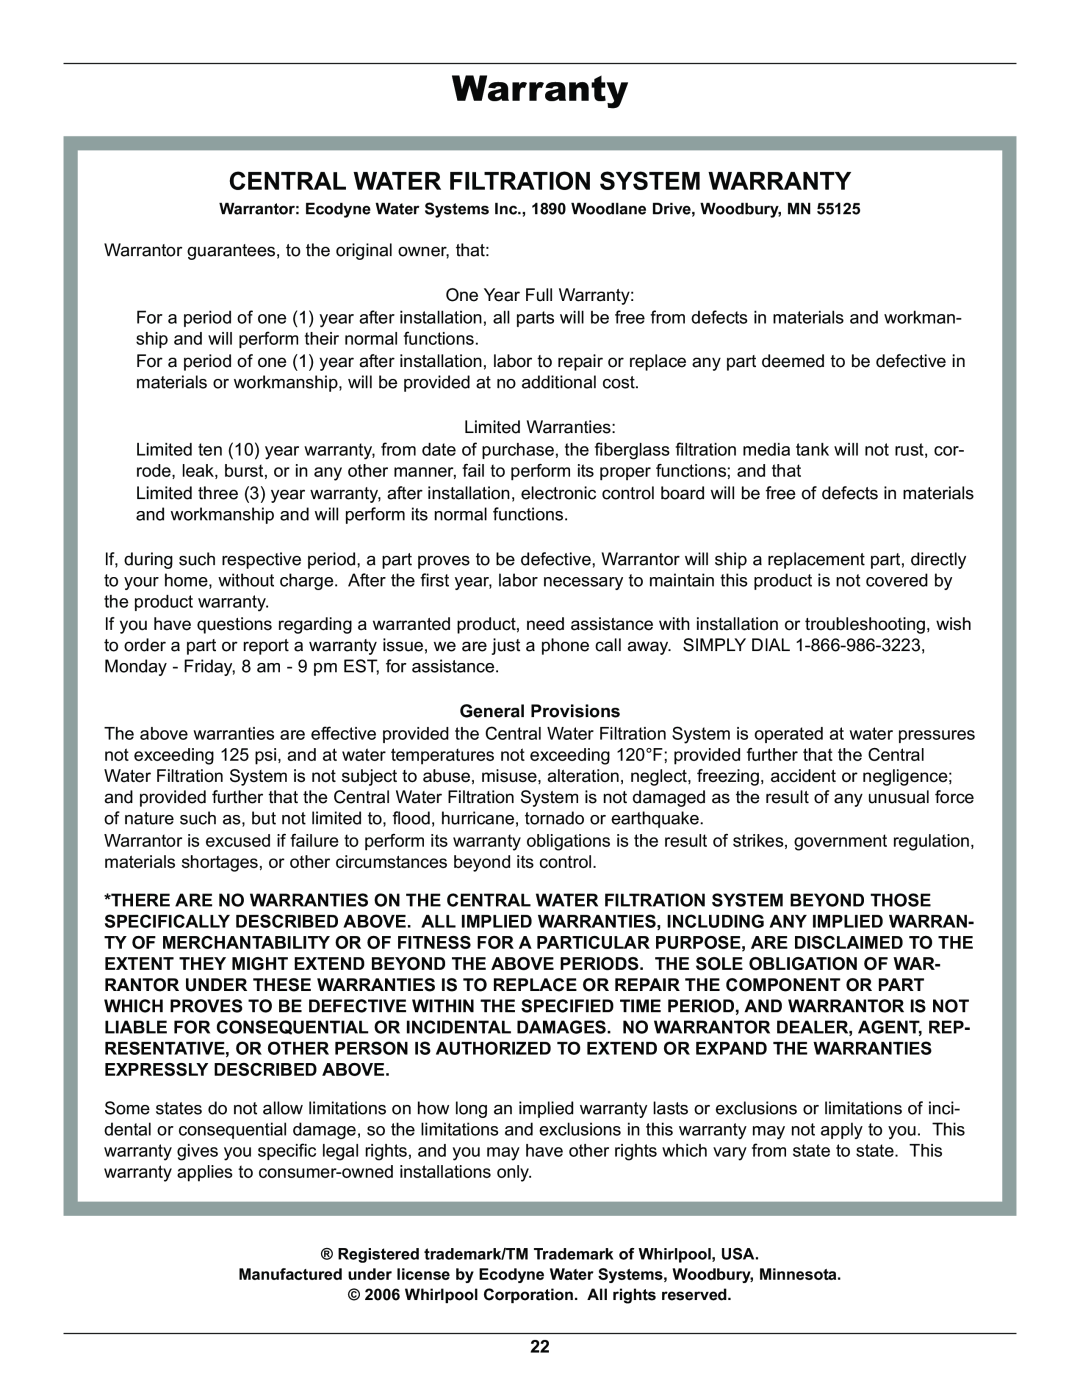 Whirlpool WHELJ1 manual Central Water Filtration System Warranty, General Provisions 